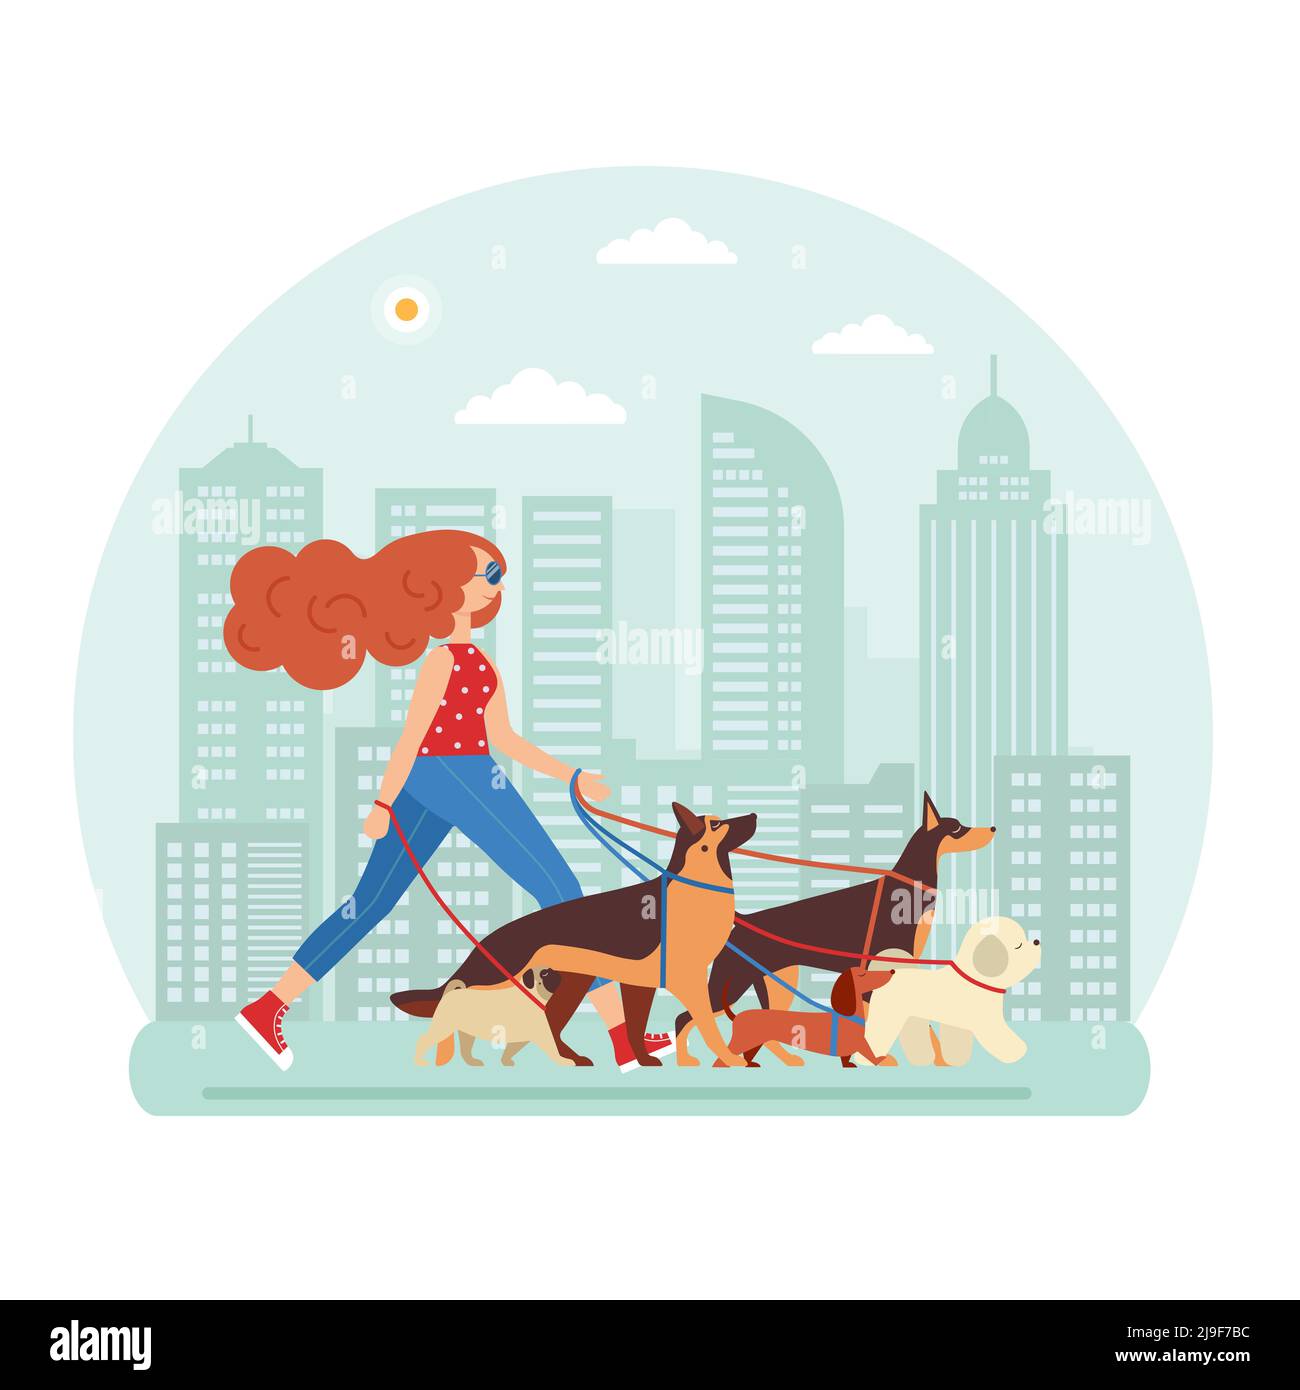 Pet Service Concept with Dog Walker Woman Stock Vector